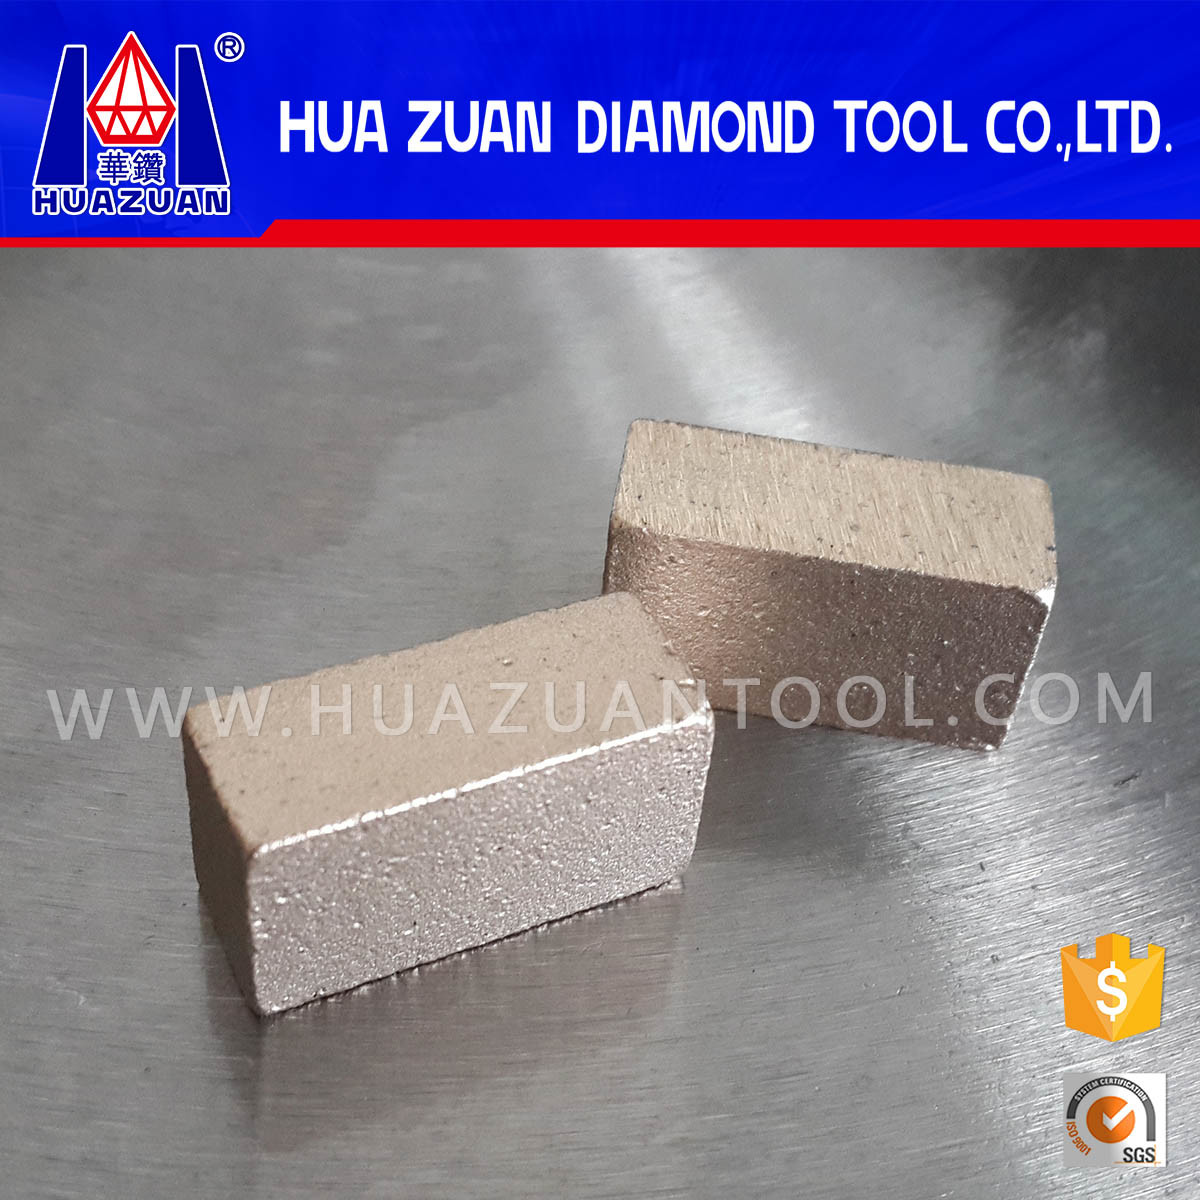 Factory Directly Diamond Cutting Disc Segment for Mexico Hard Marble